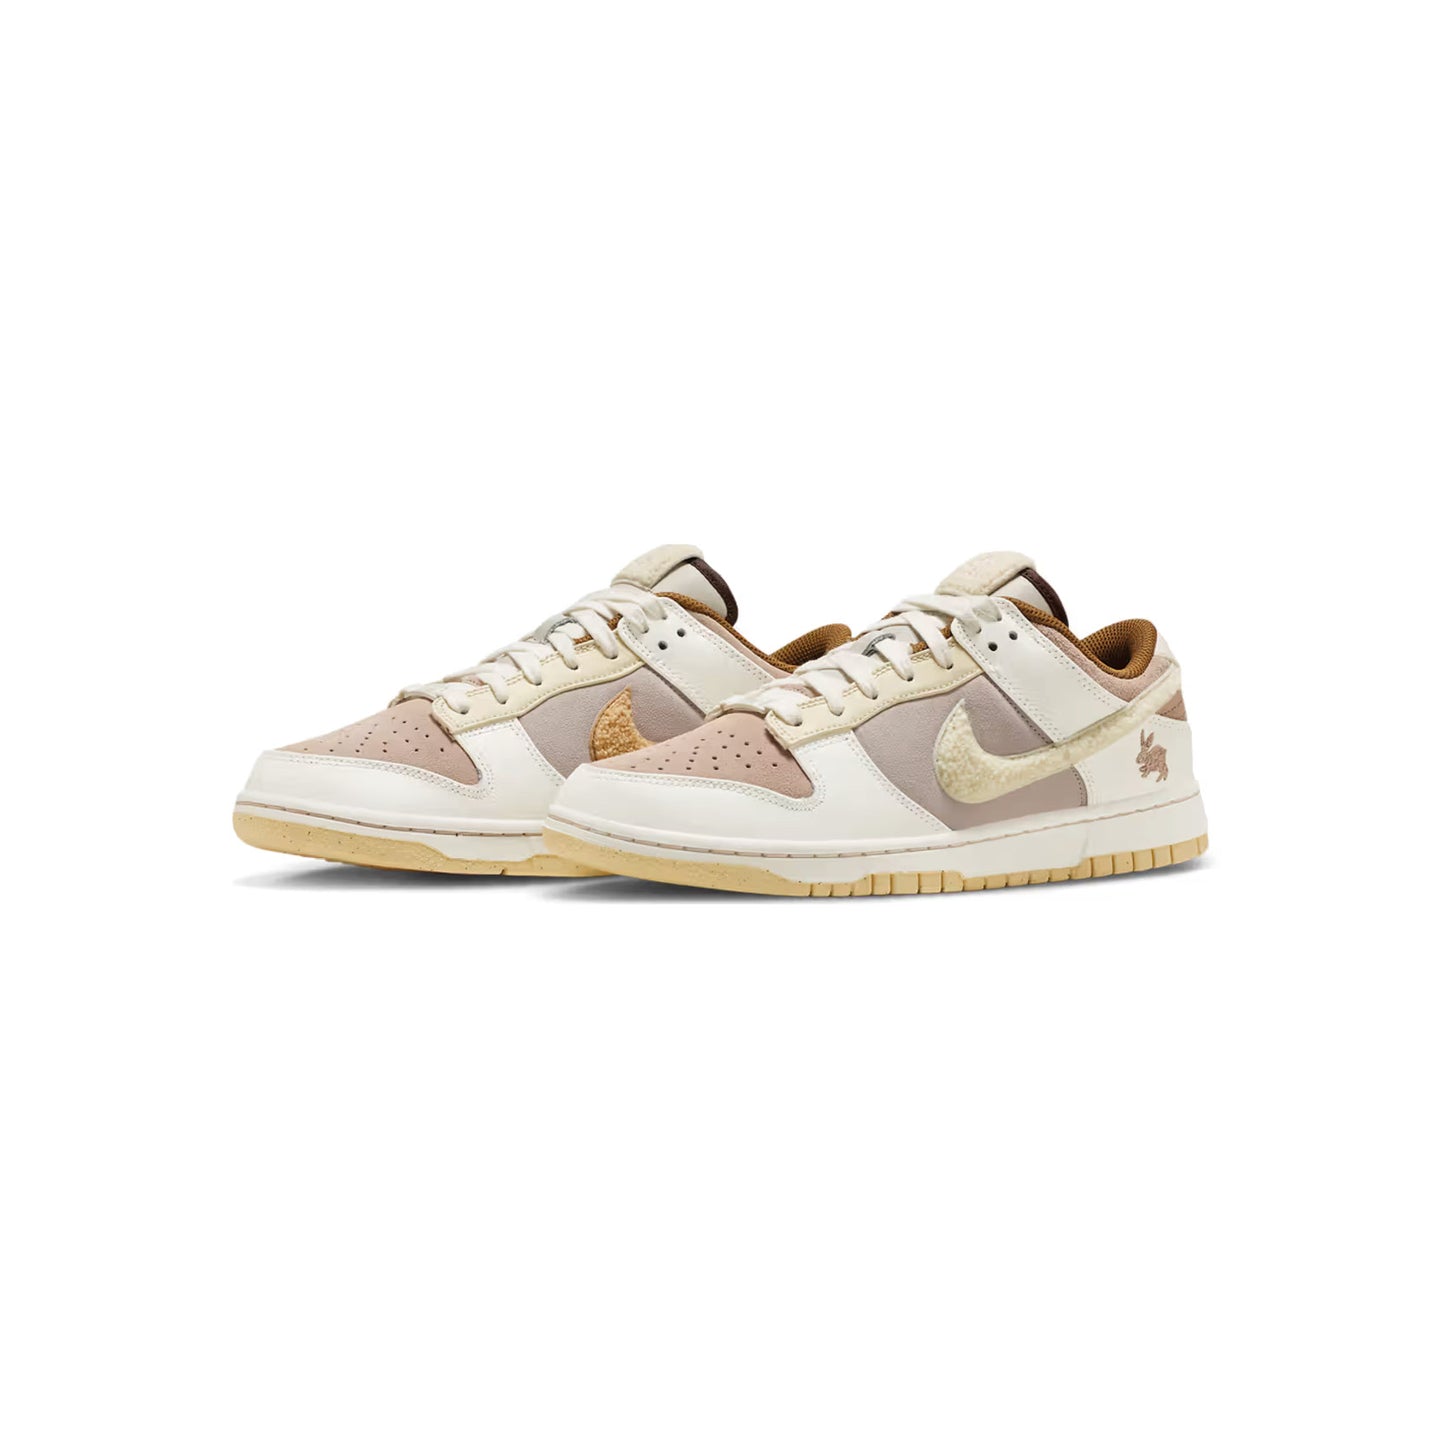 Nike Dunk Low Year of the Rabbit 'Beige/Sail'